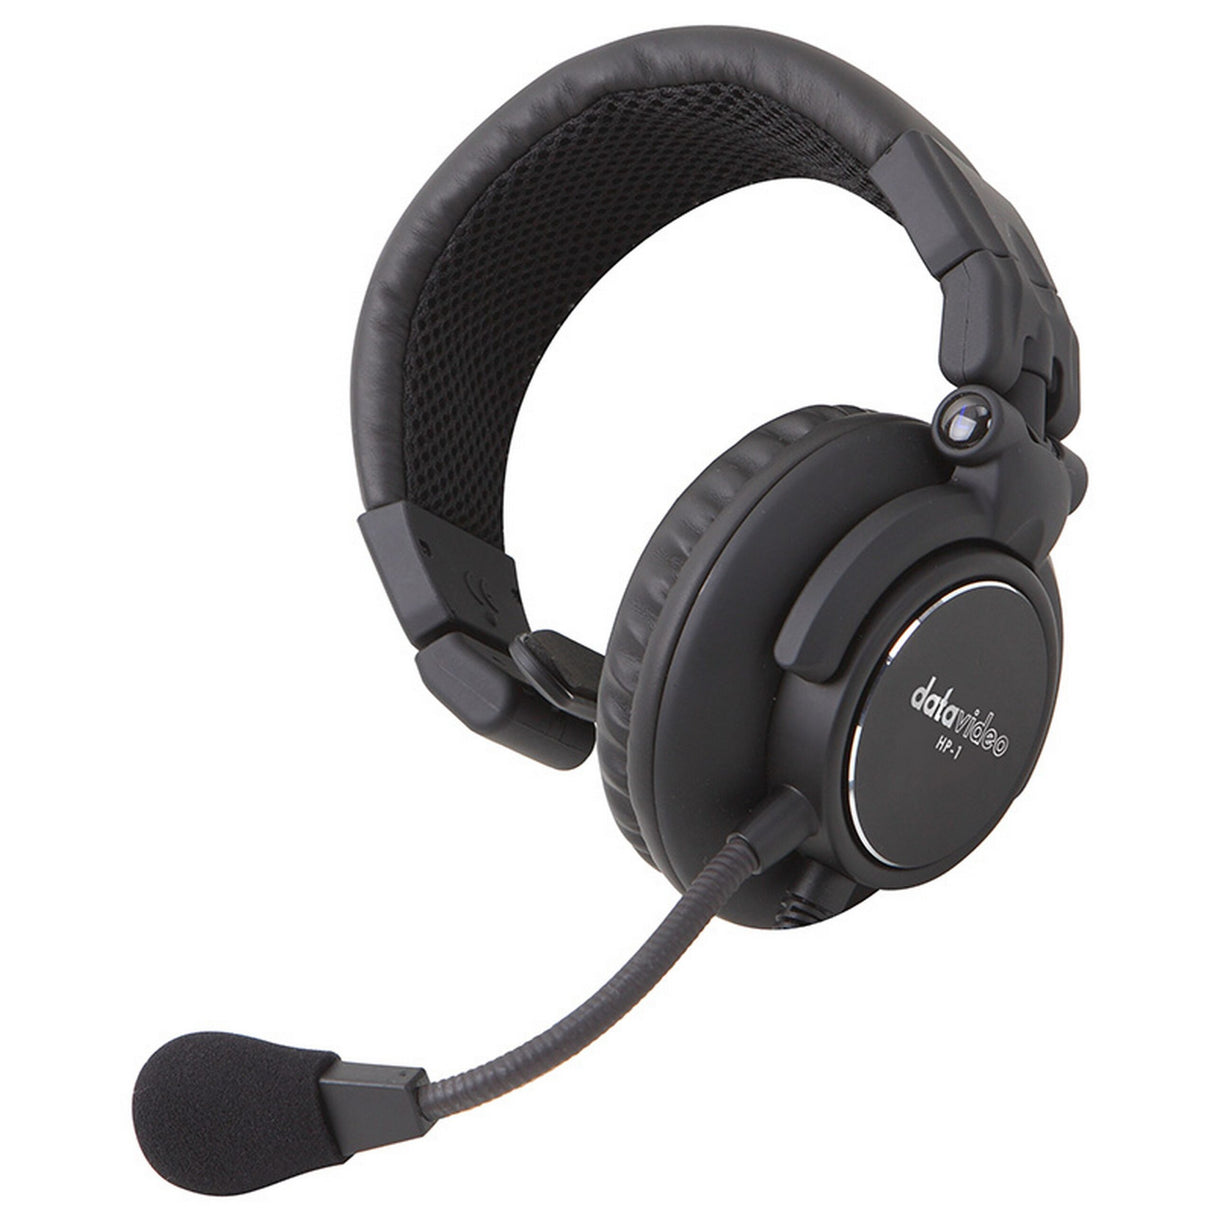 Datavideo HP1 Optional Singe-Ear Headset with Microphone for ITC-100